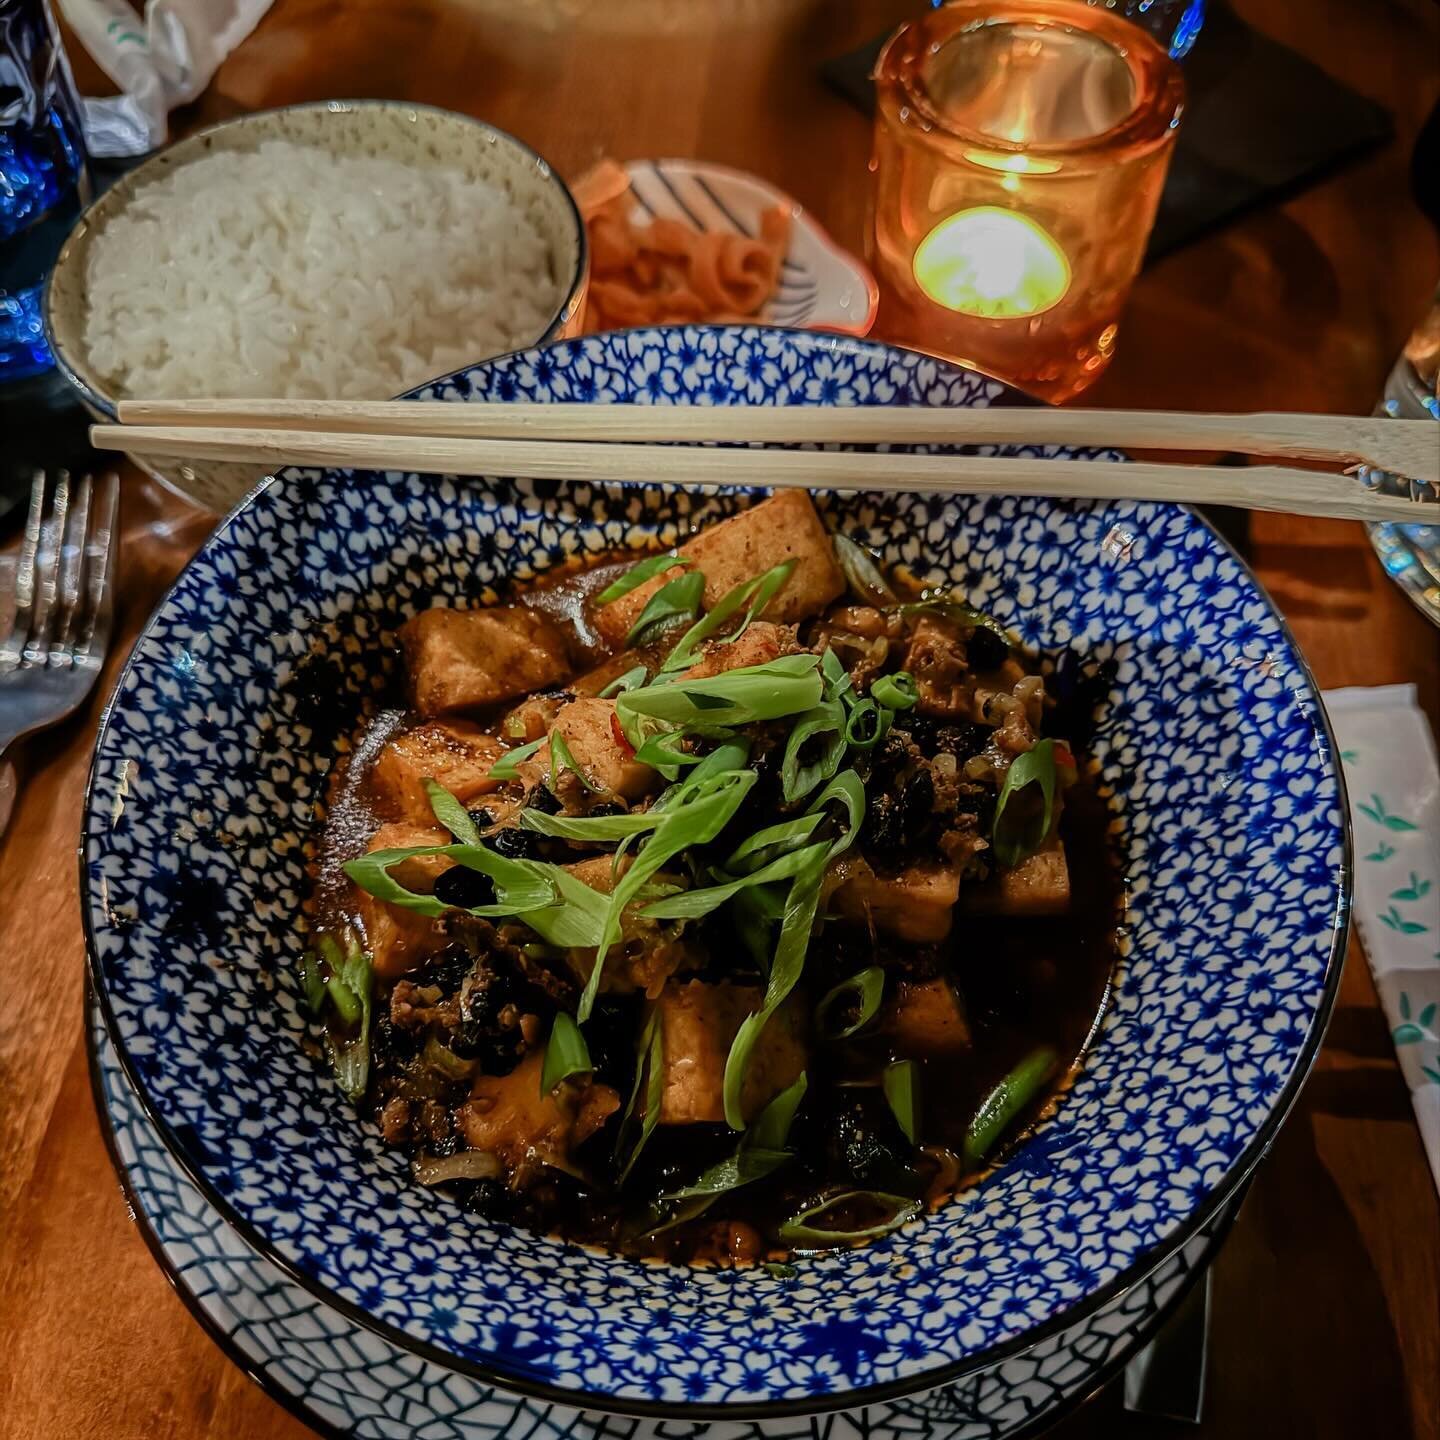 Finally had a chance to try @ernestchinesechatt - fun experience, cool ambiance and menu. Excited to have some additional new unique offerings in town. @squirrelbar was fun - will of course miss that too - but always trying to move forward. #chattano